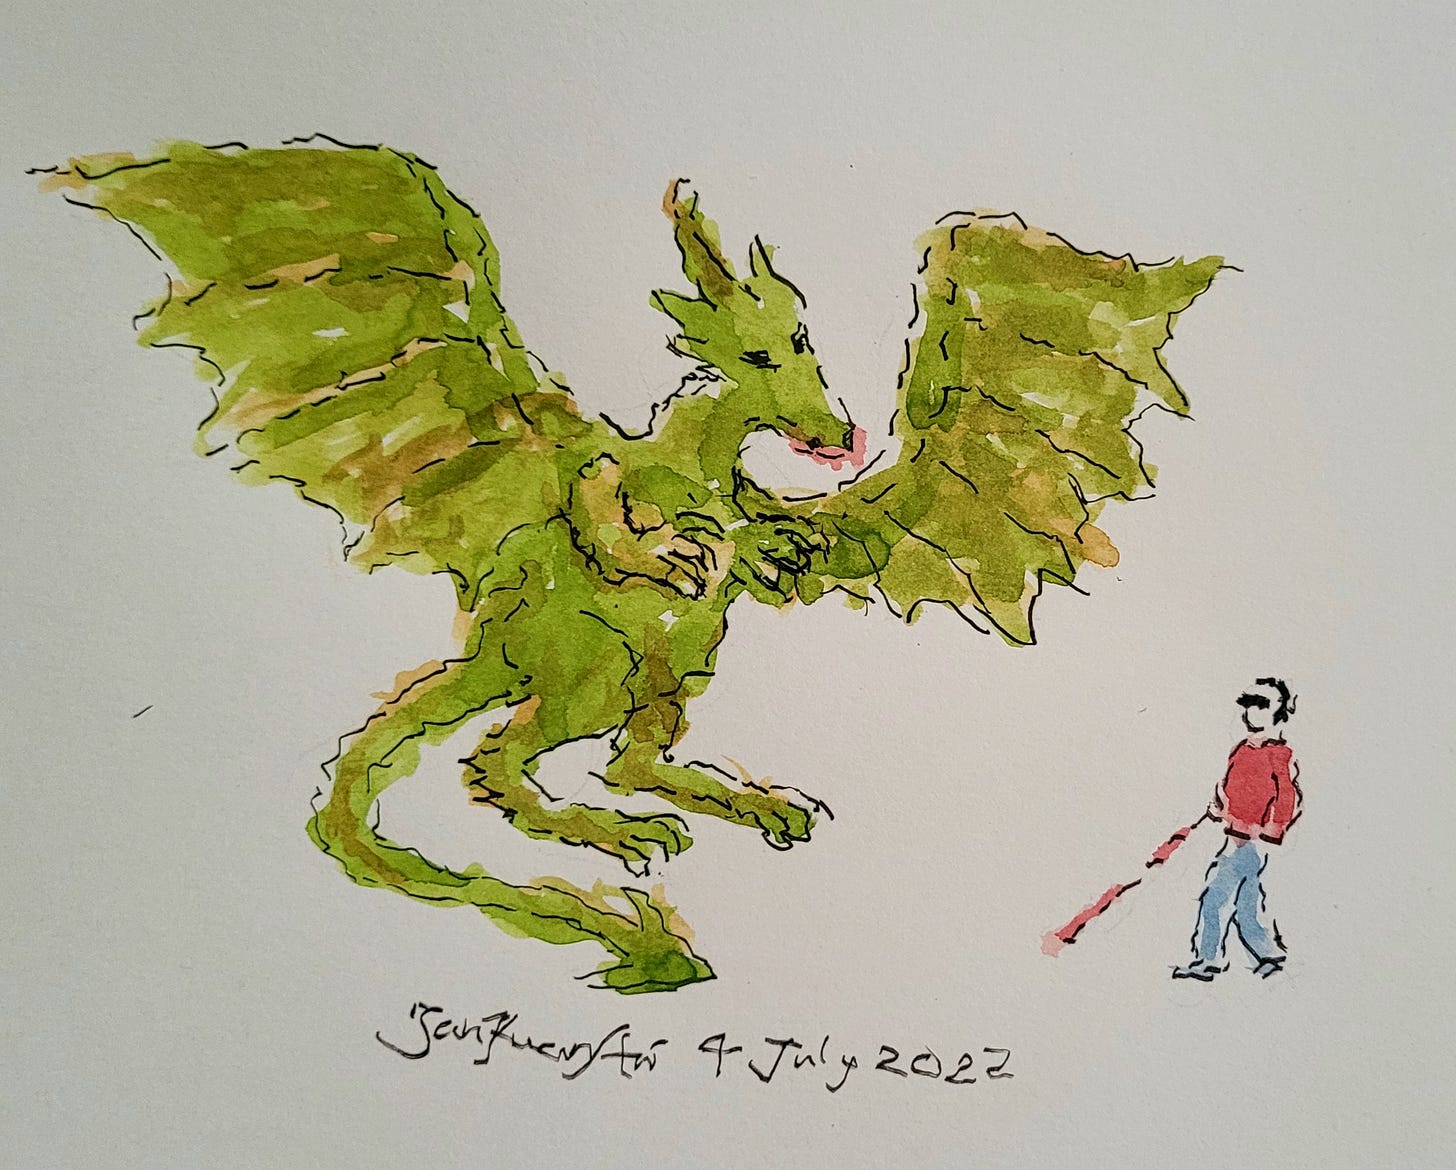 Watercolour illustration of a large dragon looming over a small person wearing dark glasses and holding a cane. The dragon is shades of green with wings outstretched, tail curved and glowering down. The person faces towards the dragon, looming backwards in trepidation, with a red top, blue trousers and flashes of red on the cane. Signed Tan Kuan Aw, 4th July 2022.